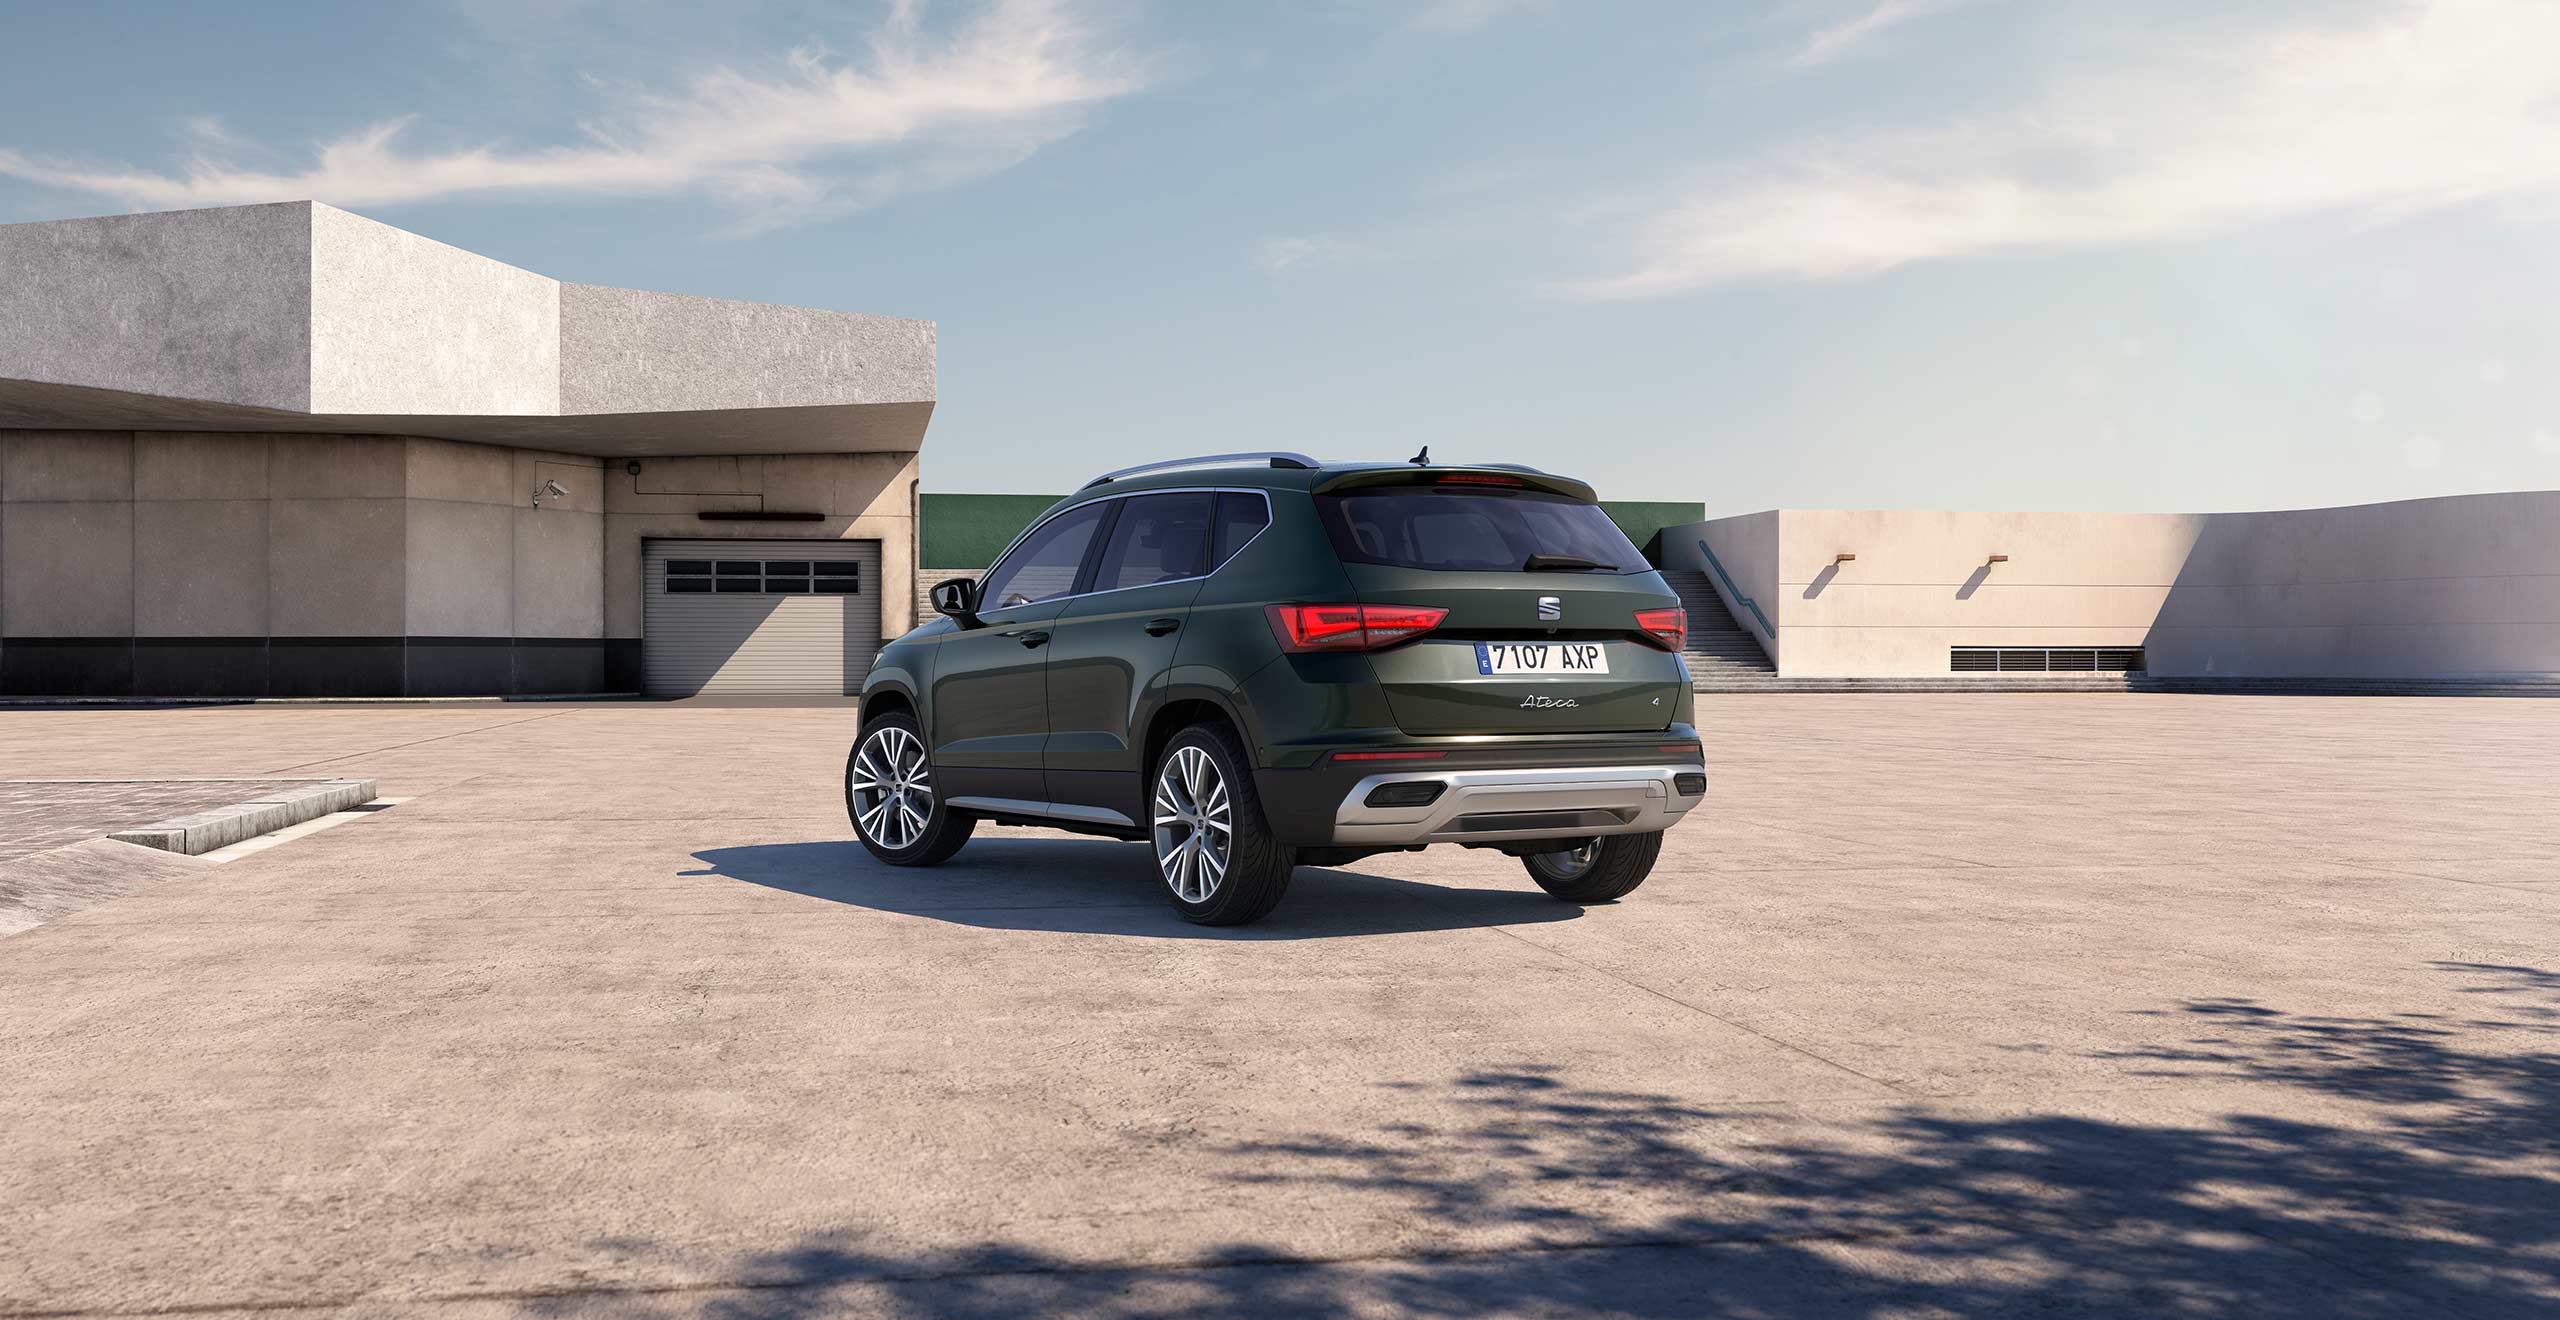 New SEAT Ateca in dark camouflage exterior rear side view with reflex silver elements